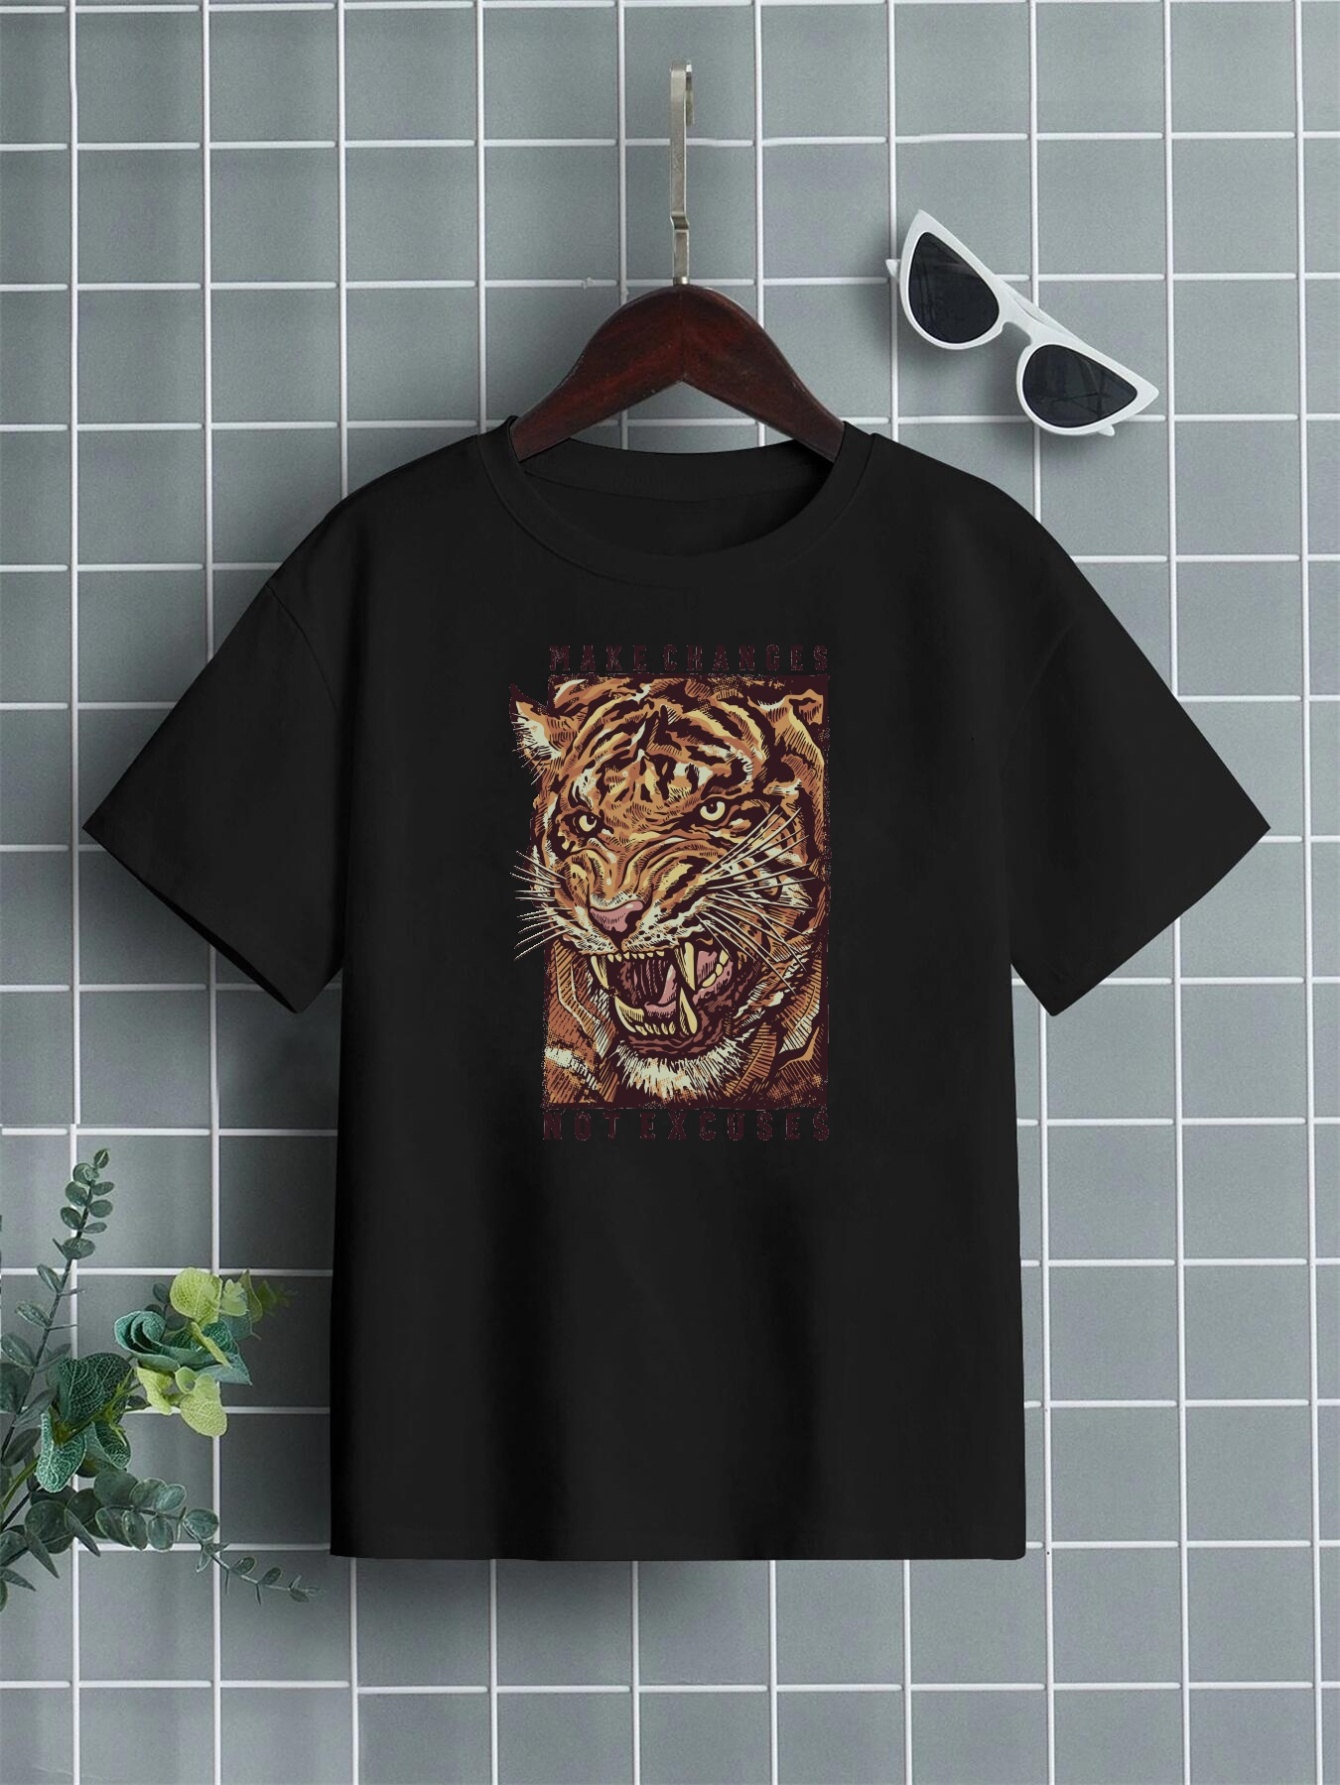 Cool Tiger And Letter Print T Shirt Tees For Kids Boys Casual